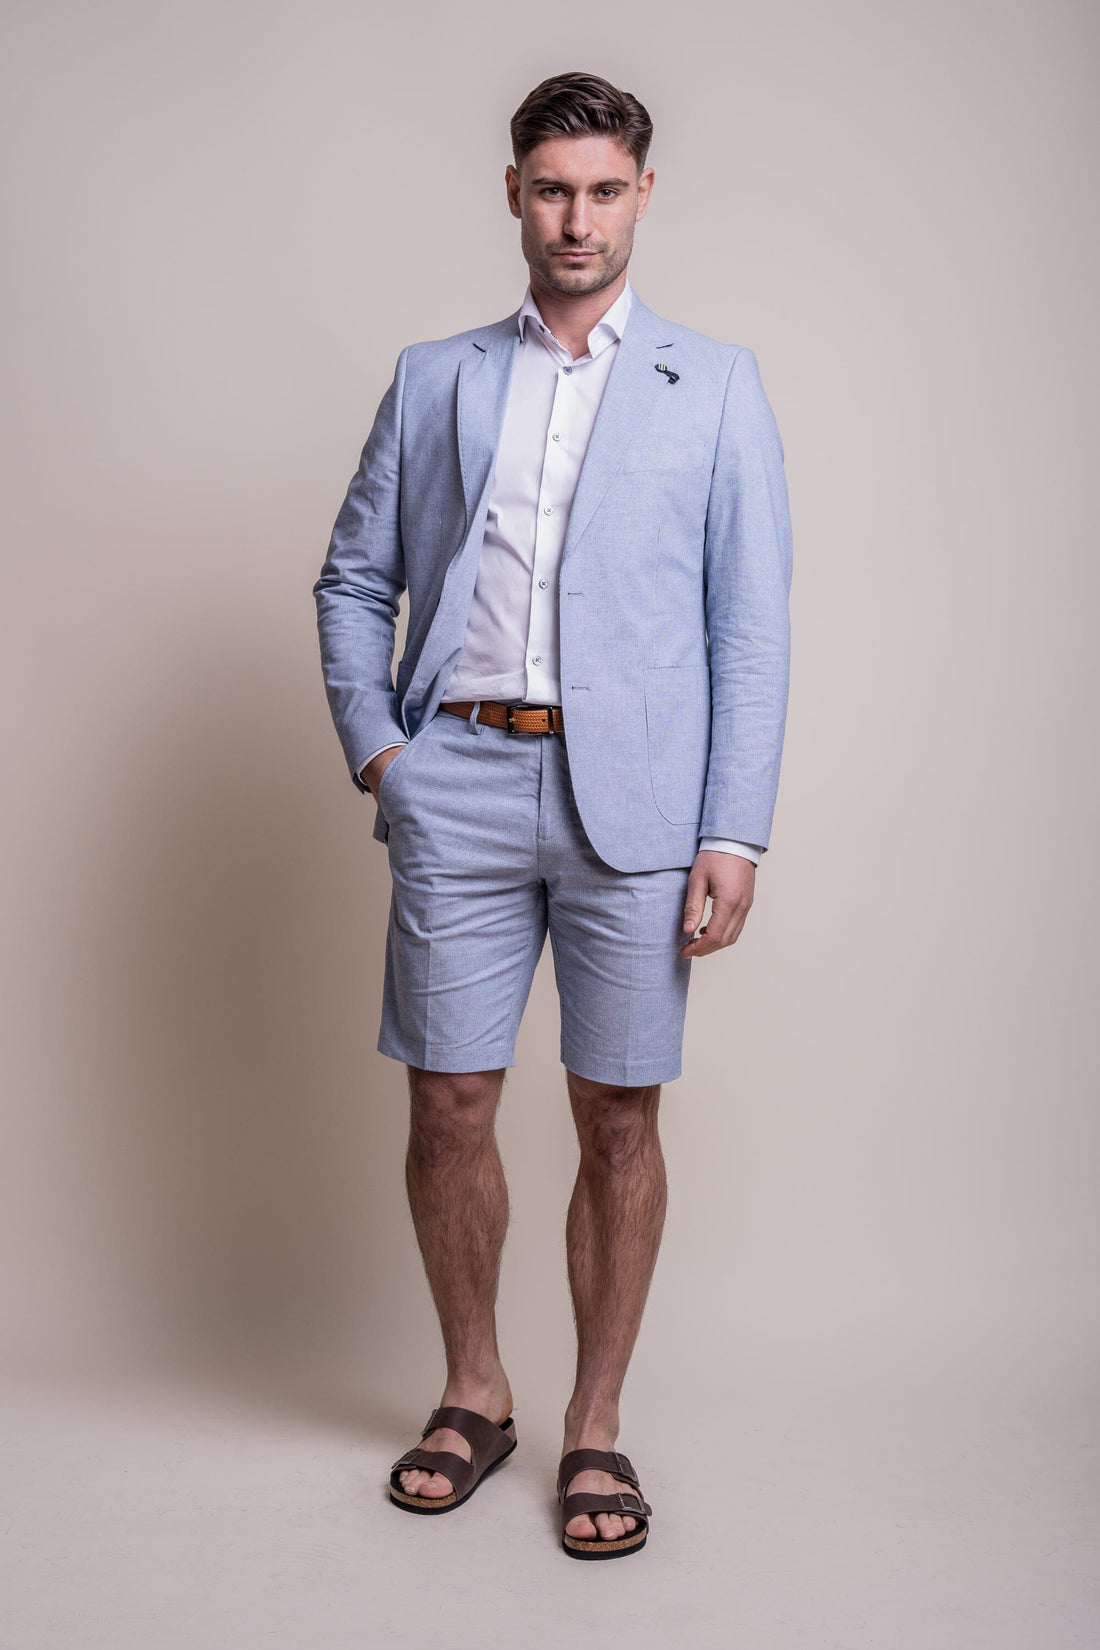 What to Wear to a Summer BBQ or Garden Party. Mens style fashion tips from THREADPEPPER.